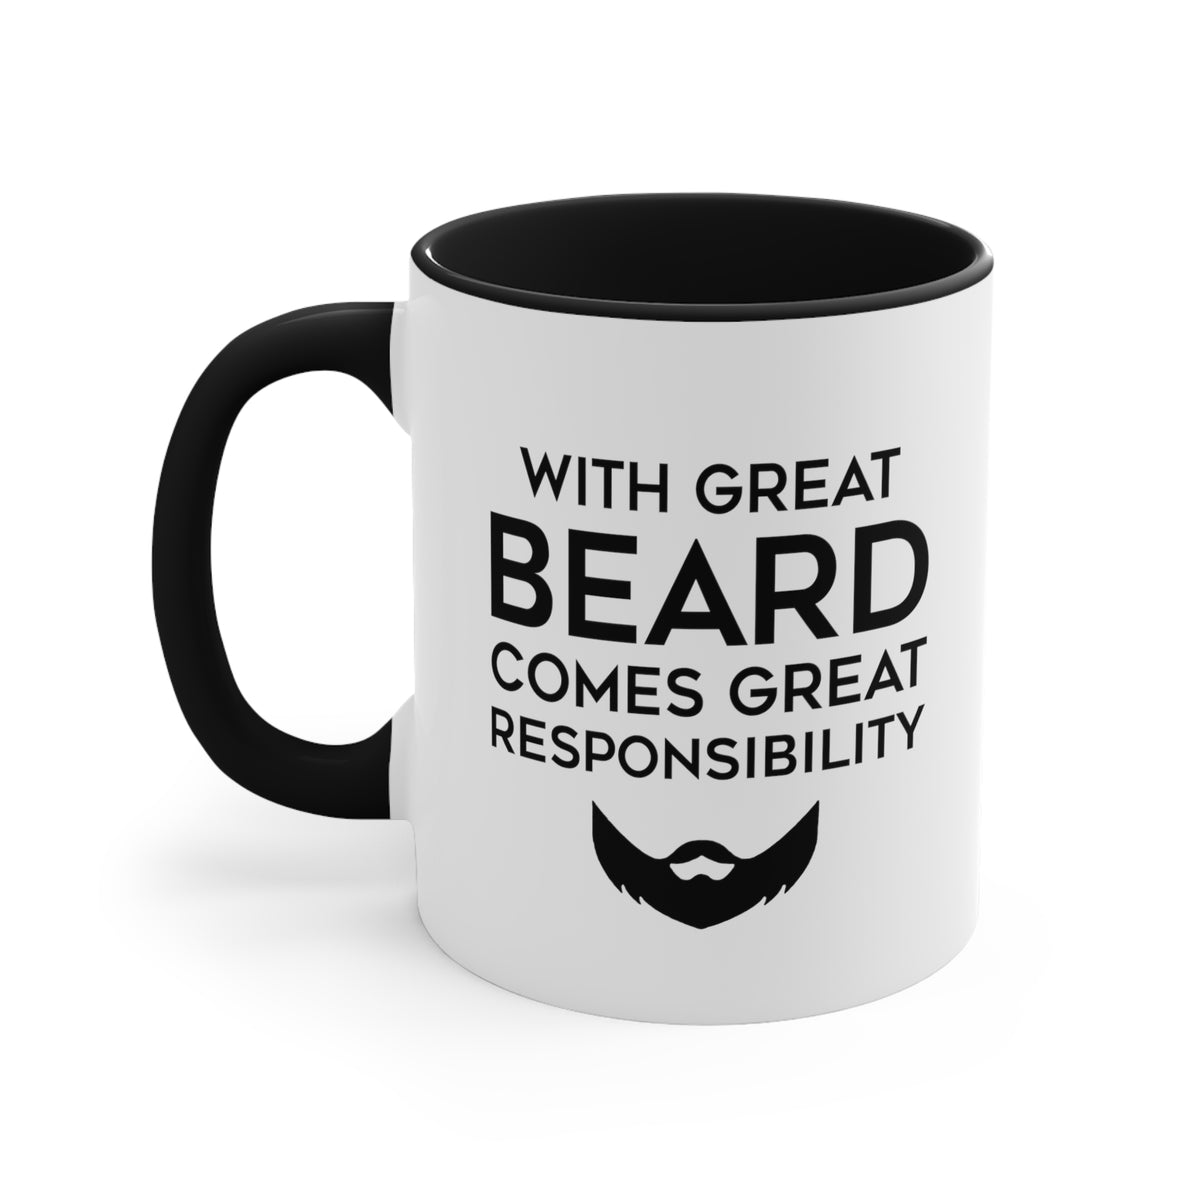 Fathers Day Two Tone Coffee Mug, With Great Beard Comes Great Responsibility, Unique Gifts For Dad From Daughter Son